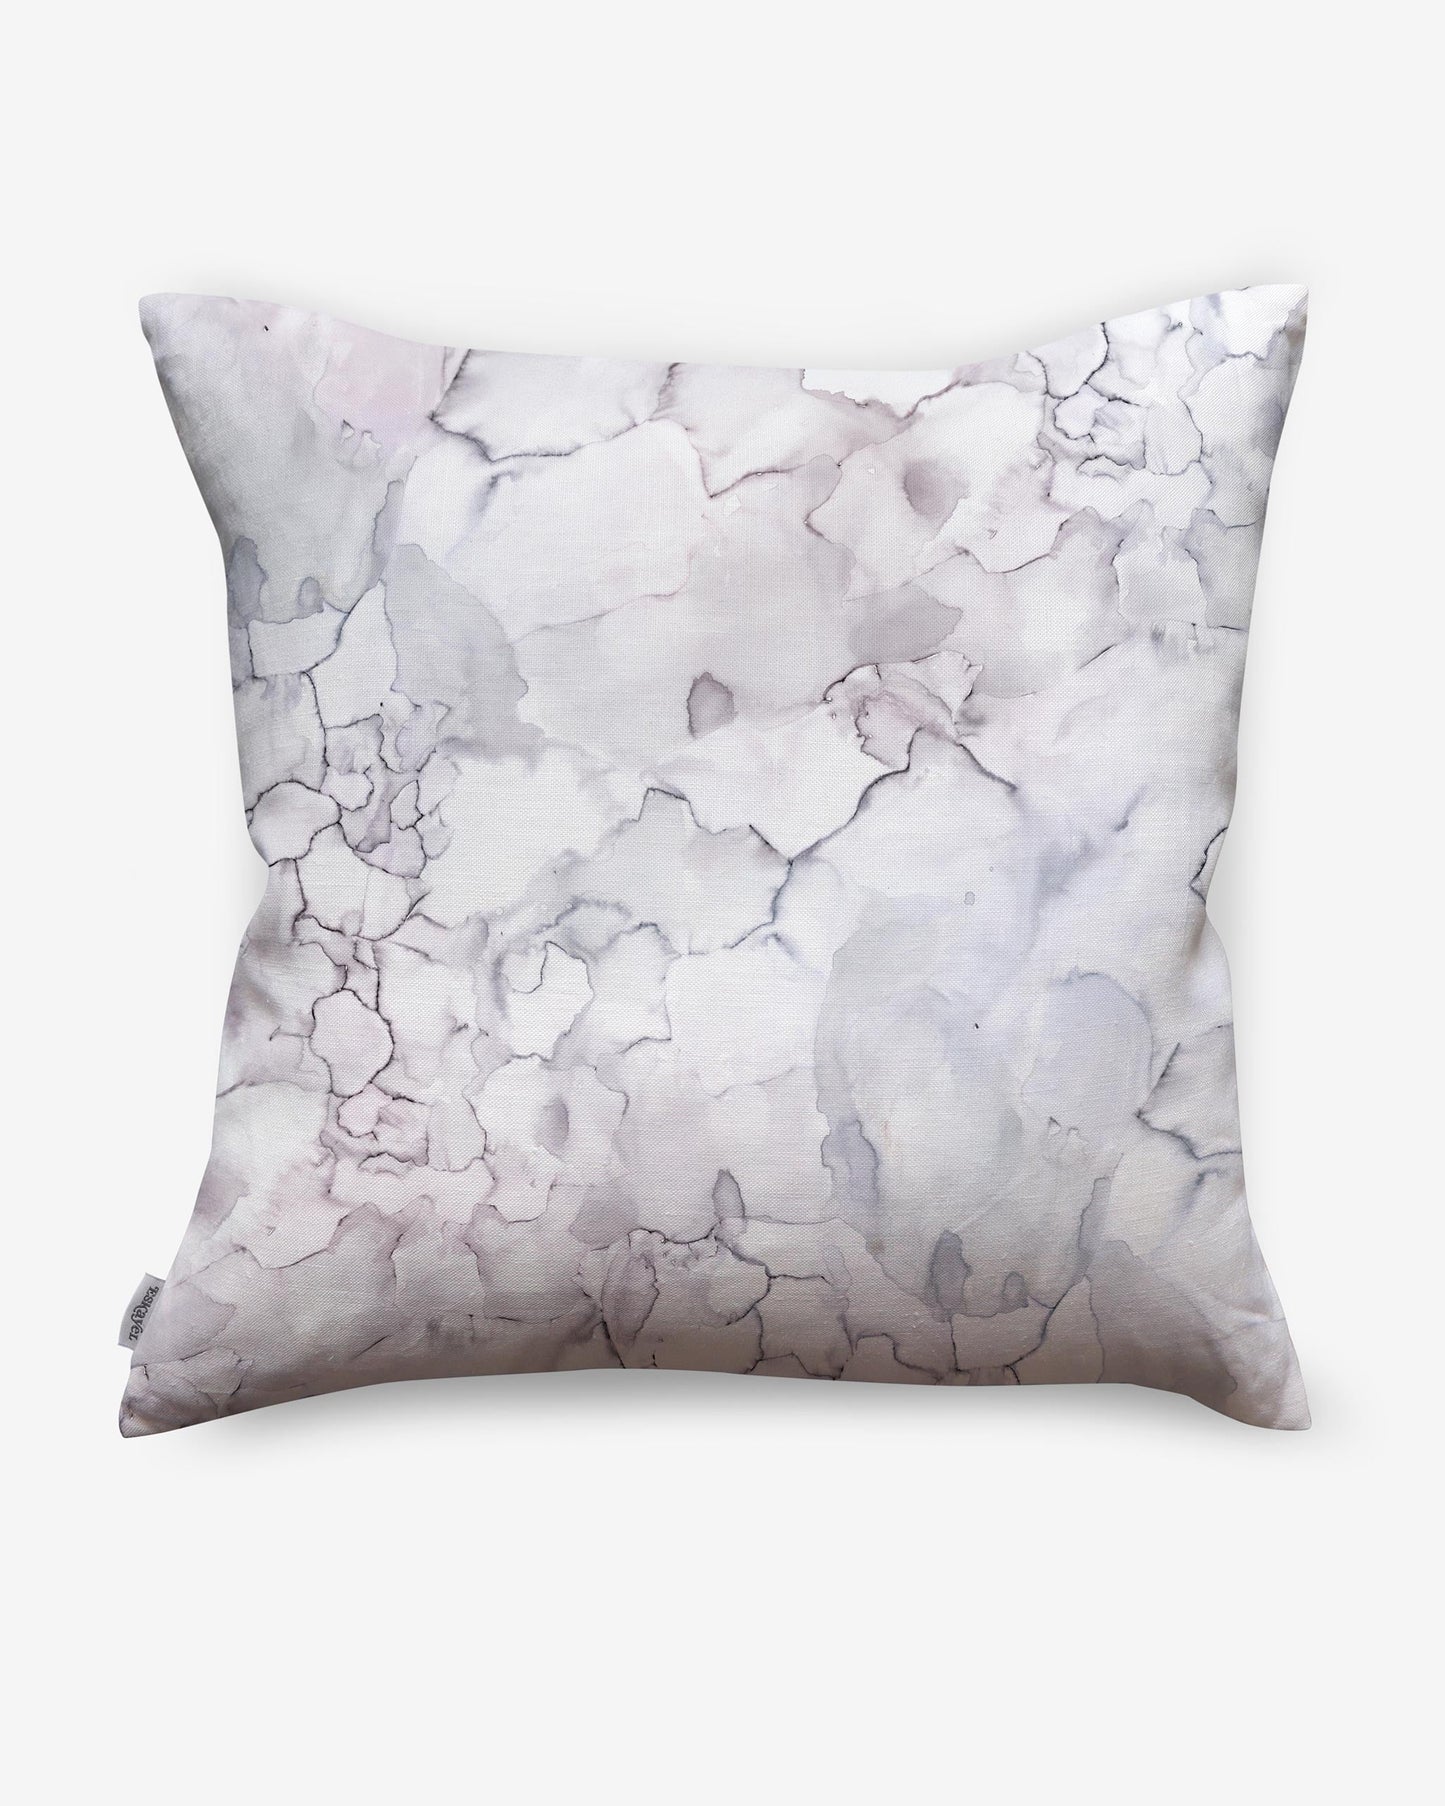 An Aquarelle Pillow Ice with a white and grey marble pattern, perfect for adding a touch of luxury to your bedroom